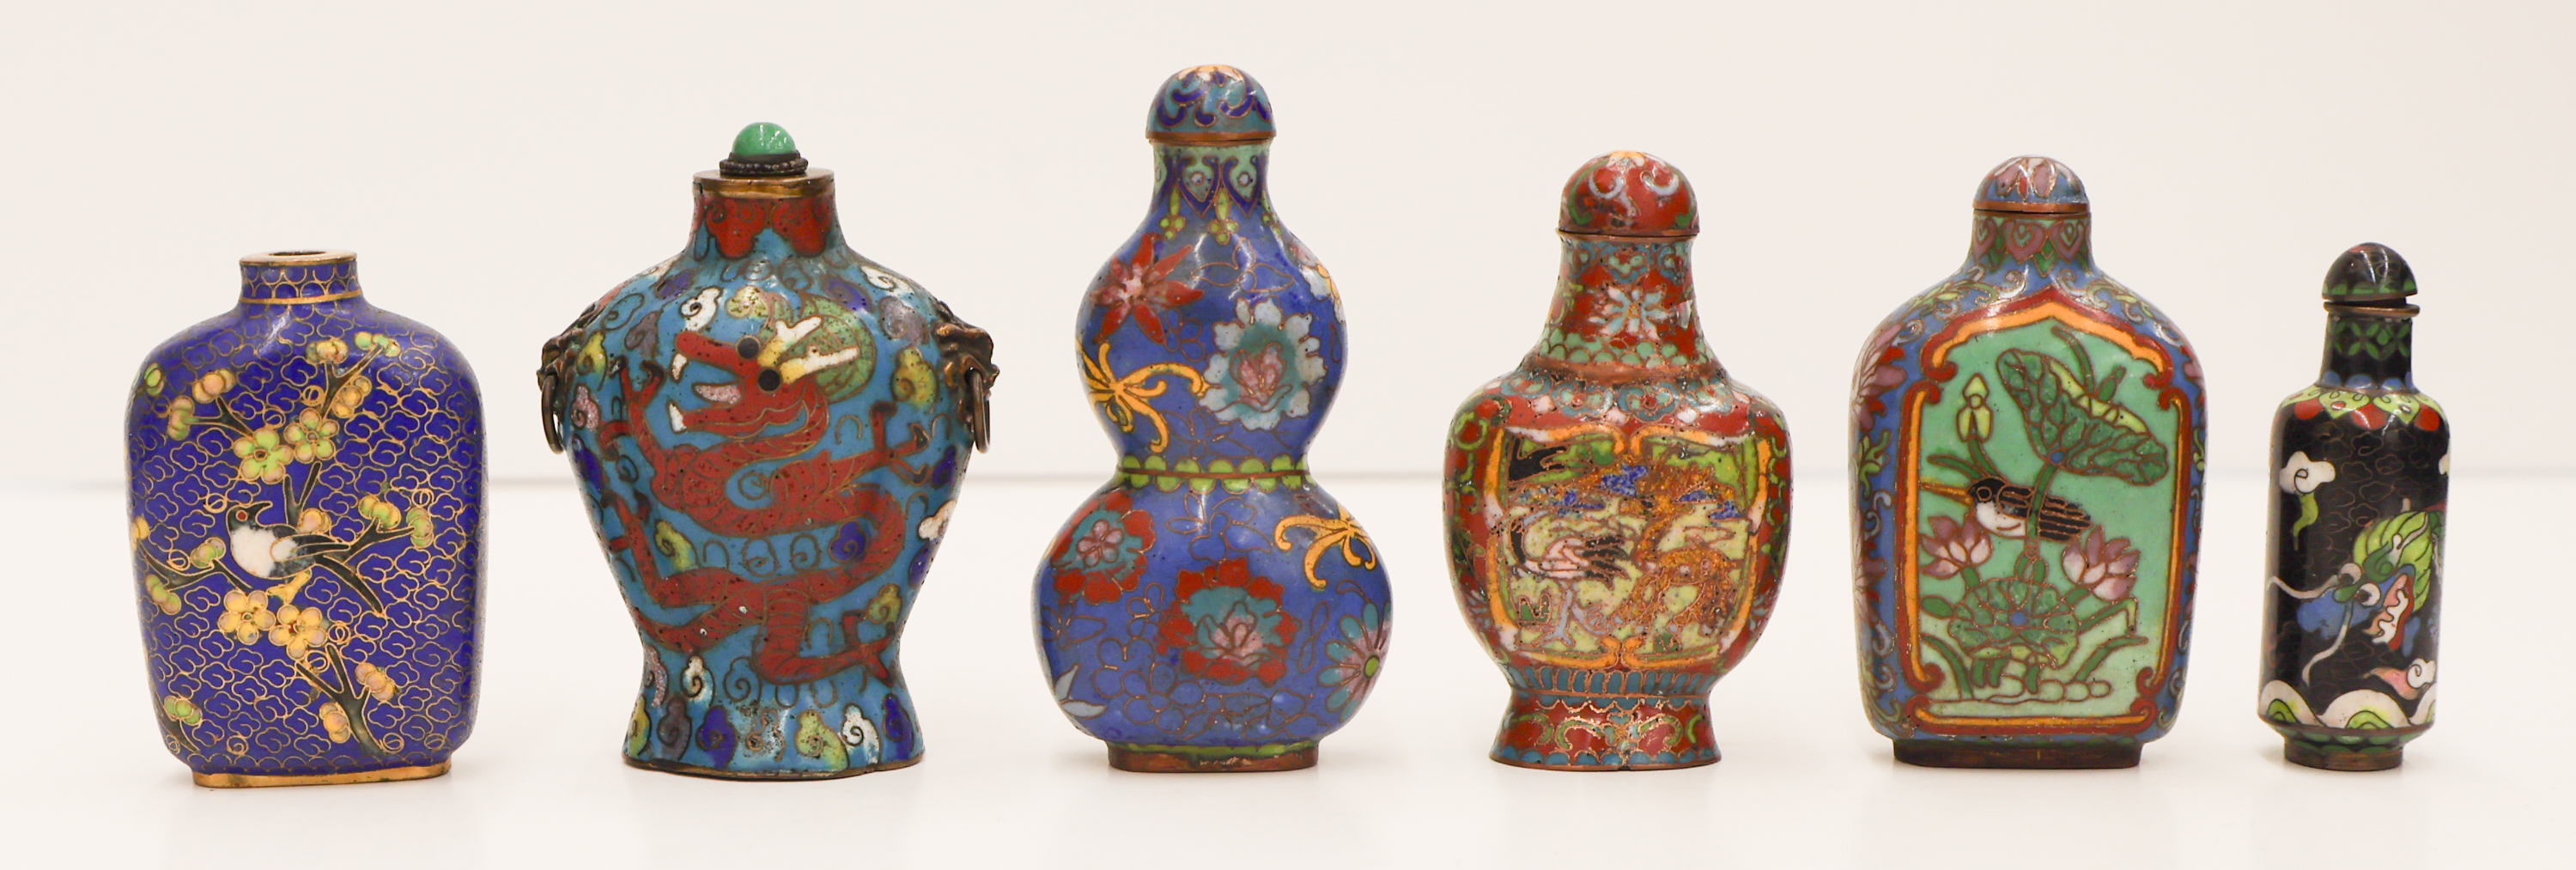 6pc Chinese Cloisonne Snuff Bottles